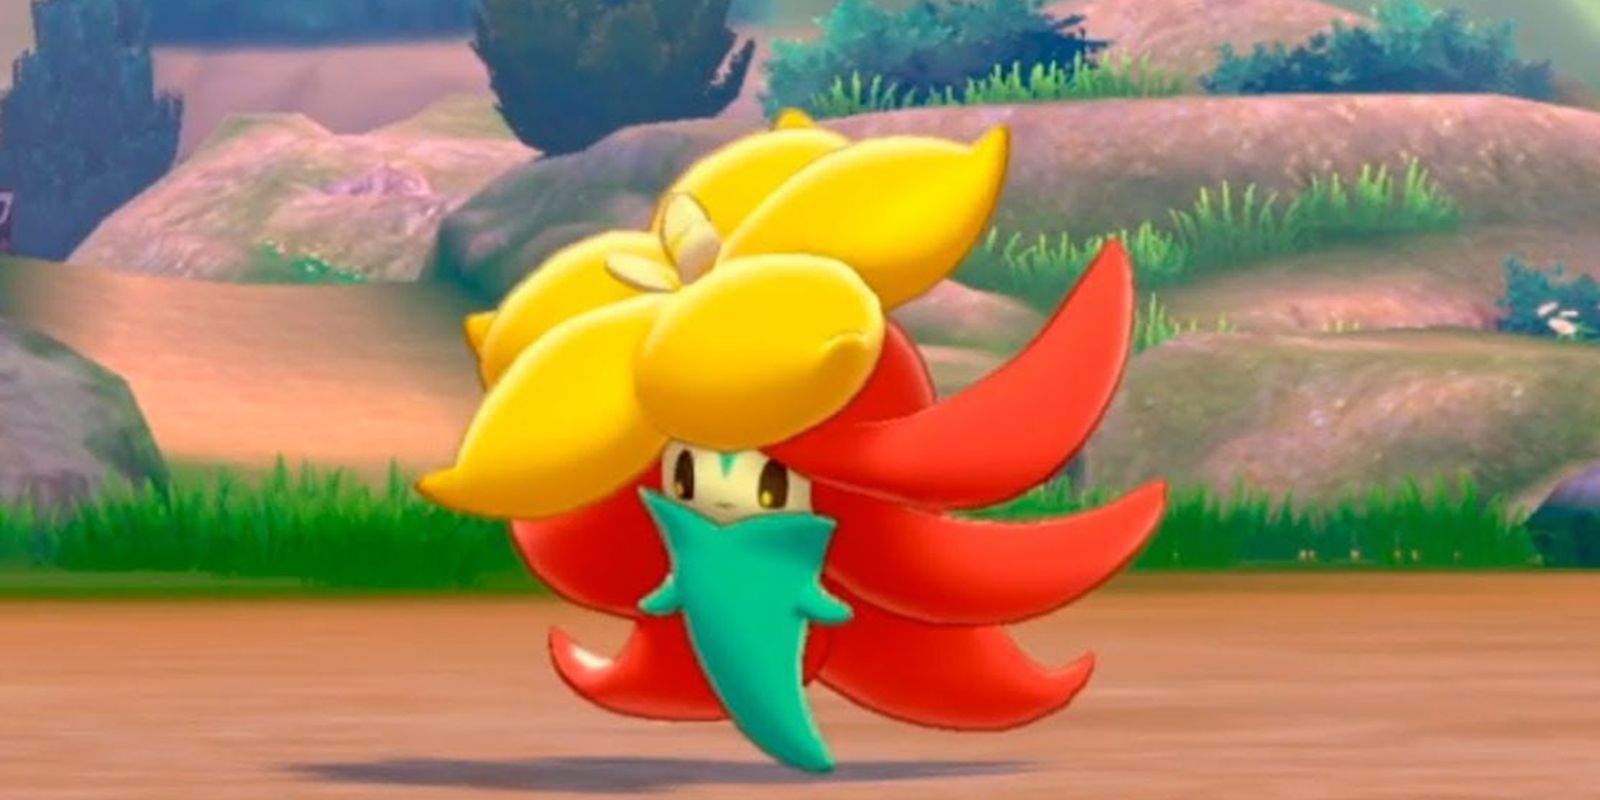 A Gossifleur smiling during battle in Pokemon Sword and Shield.